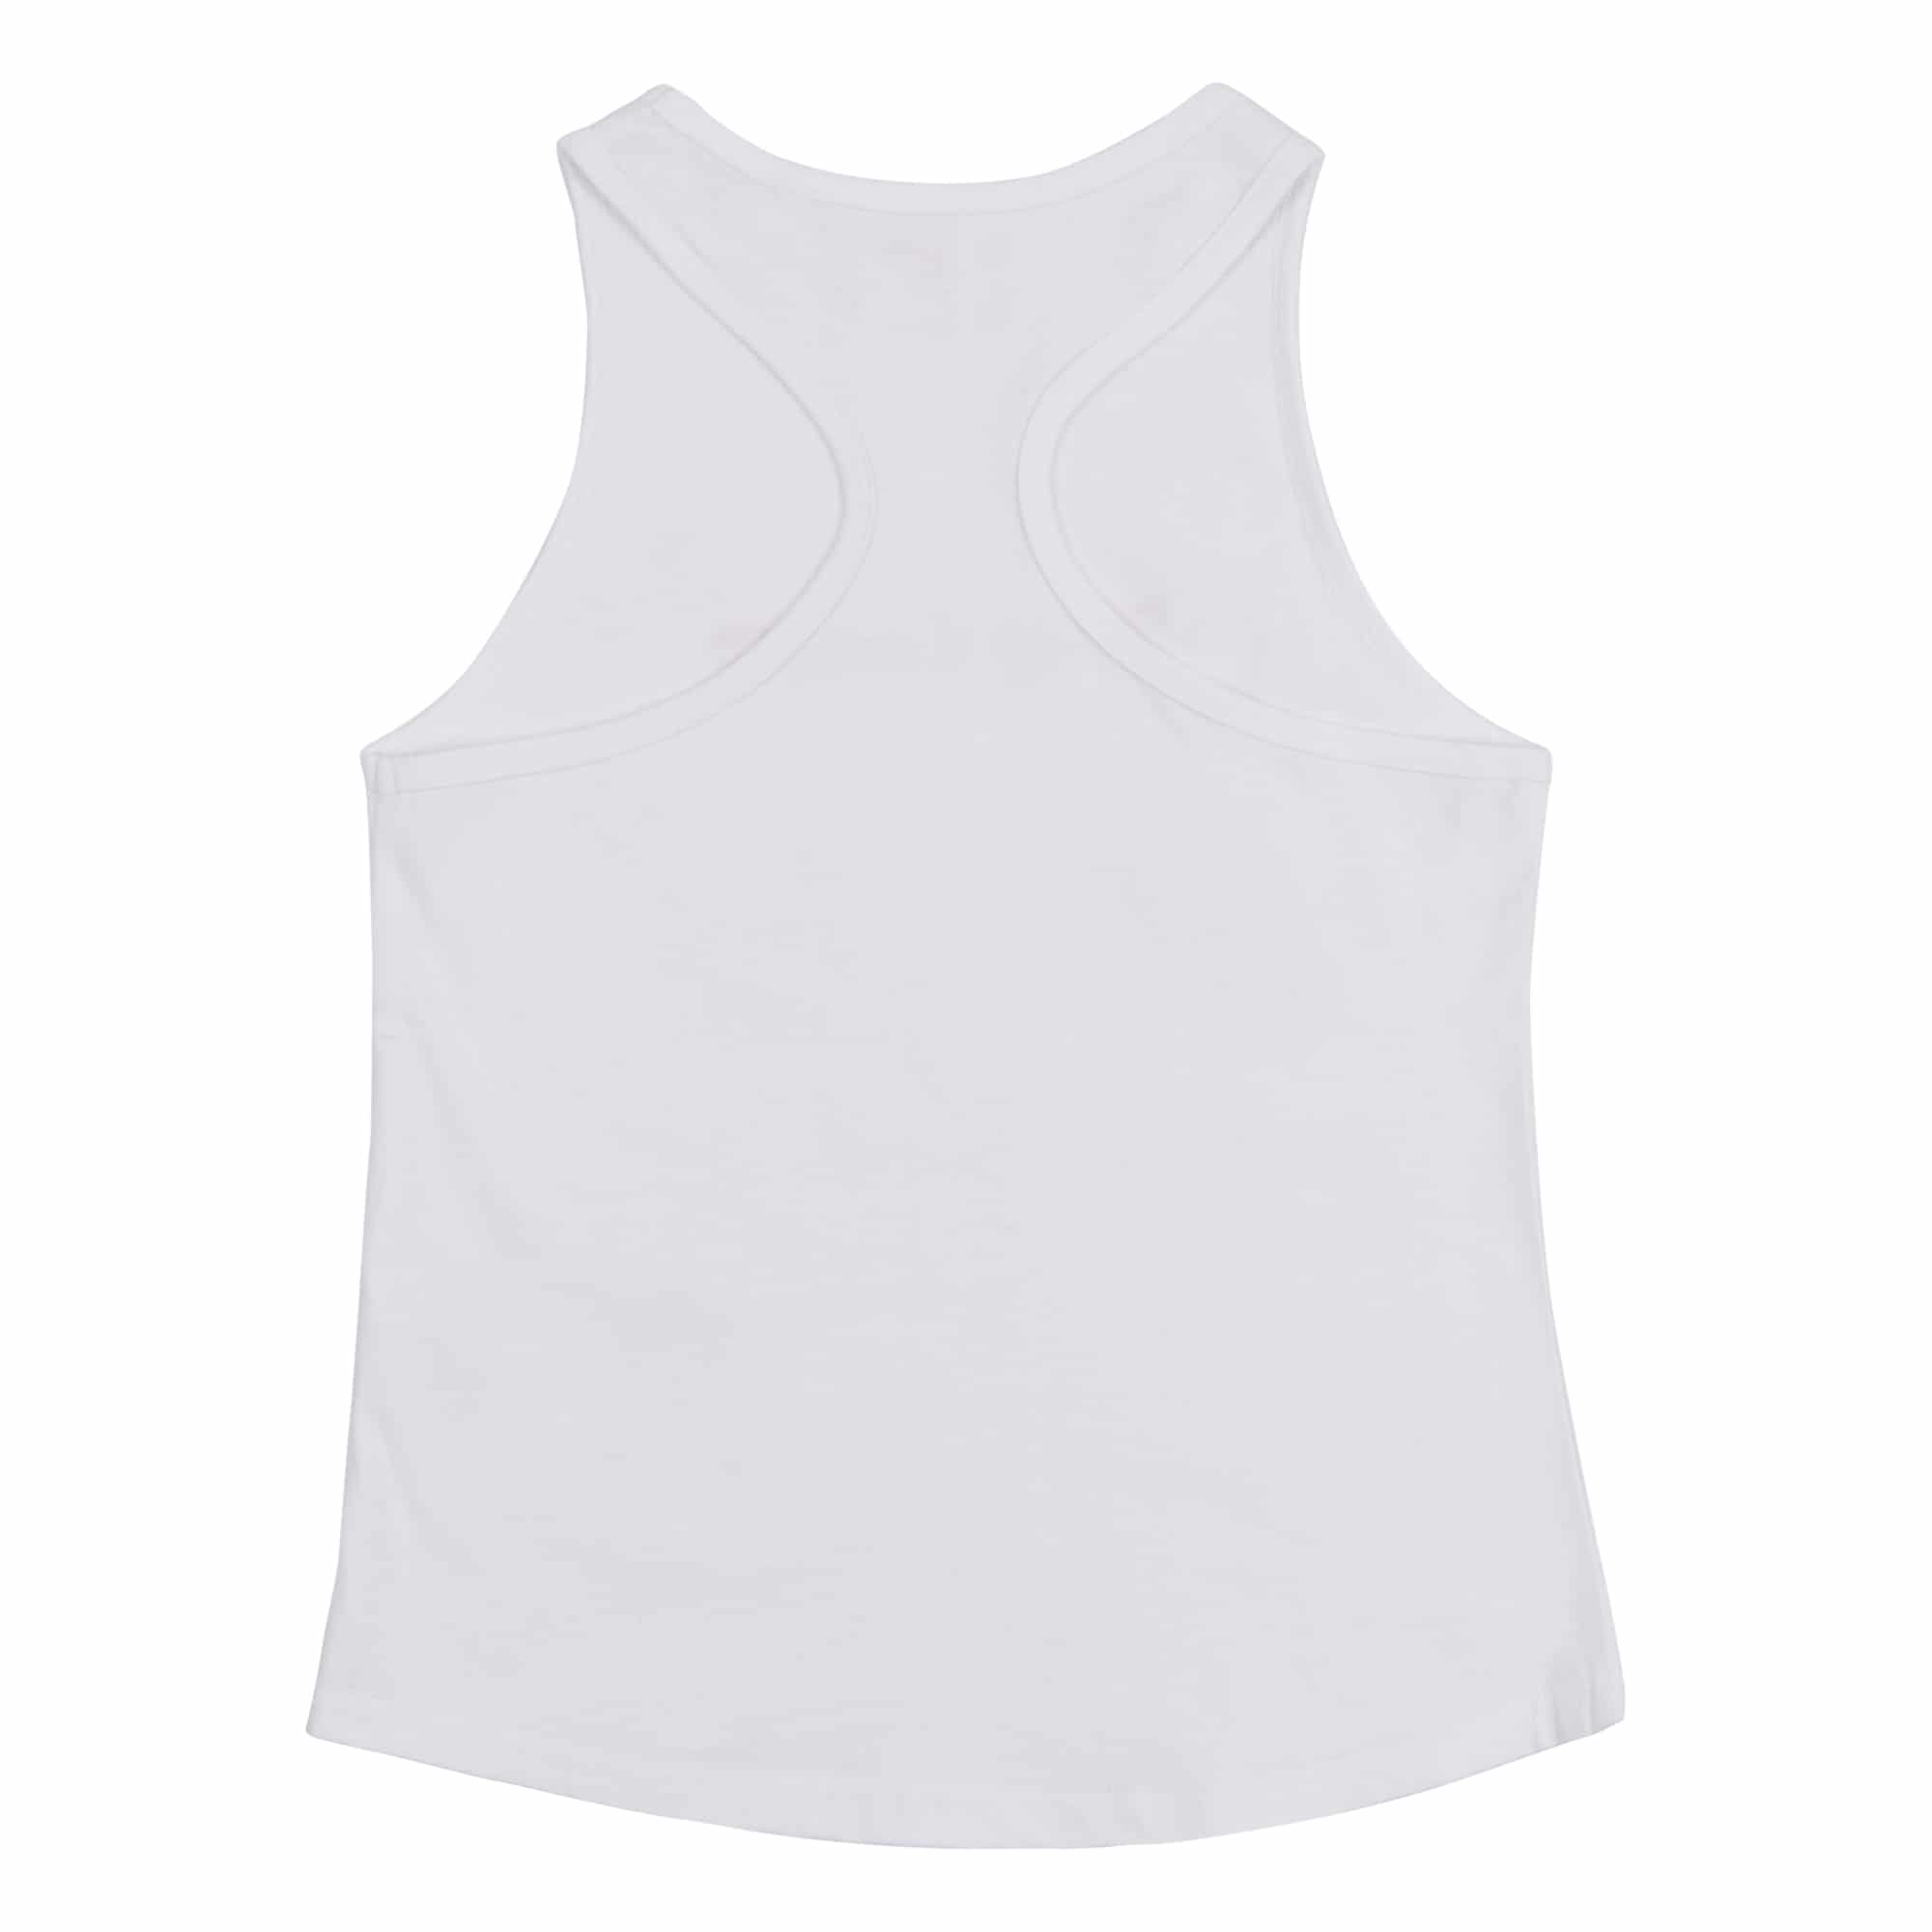 juicy couture girls white vest top back view